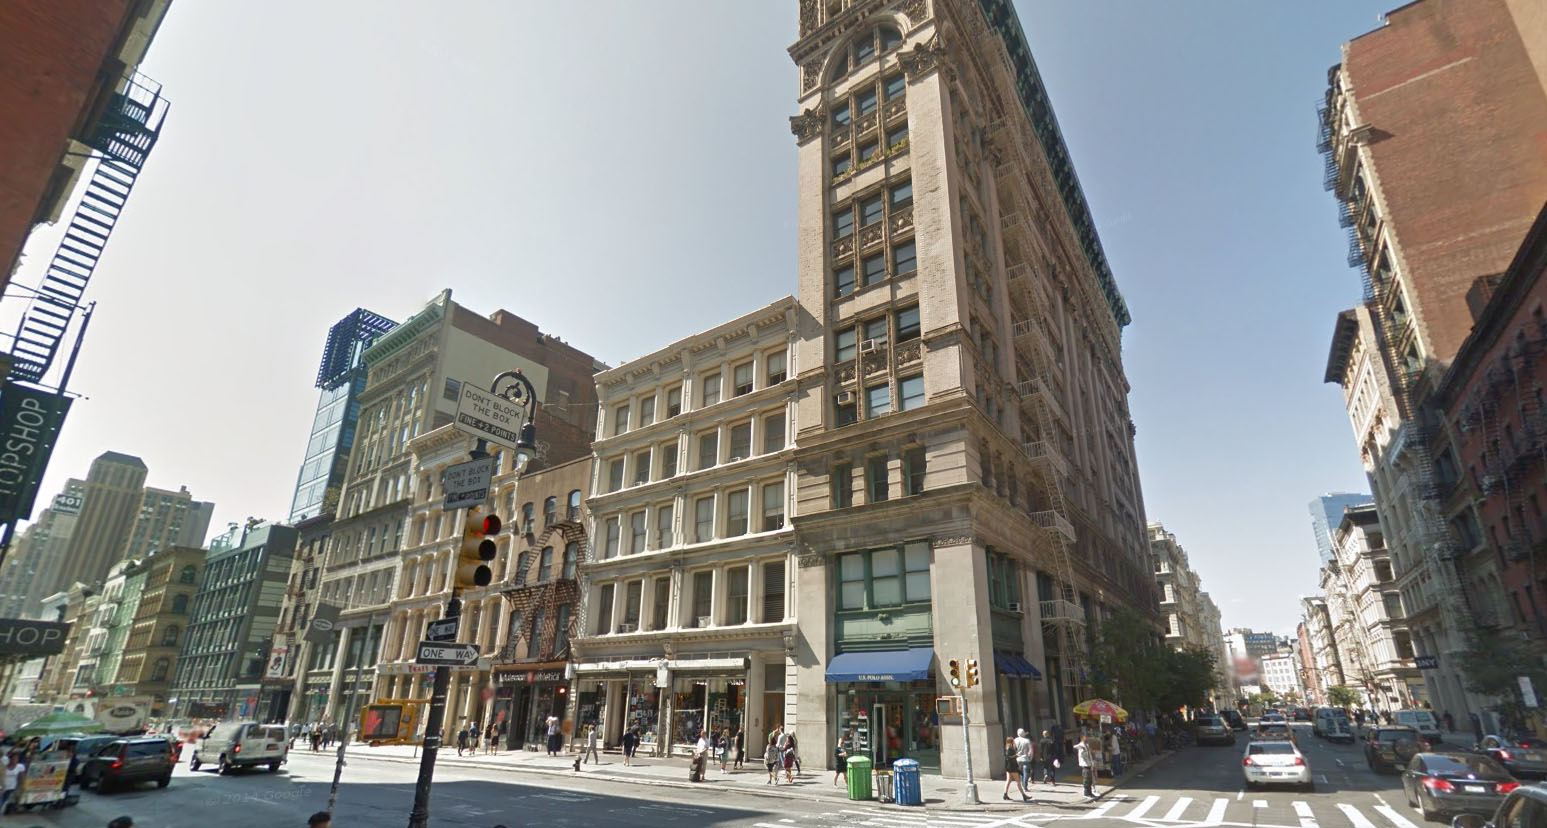 485 Broadway today, as per Google Street View.